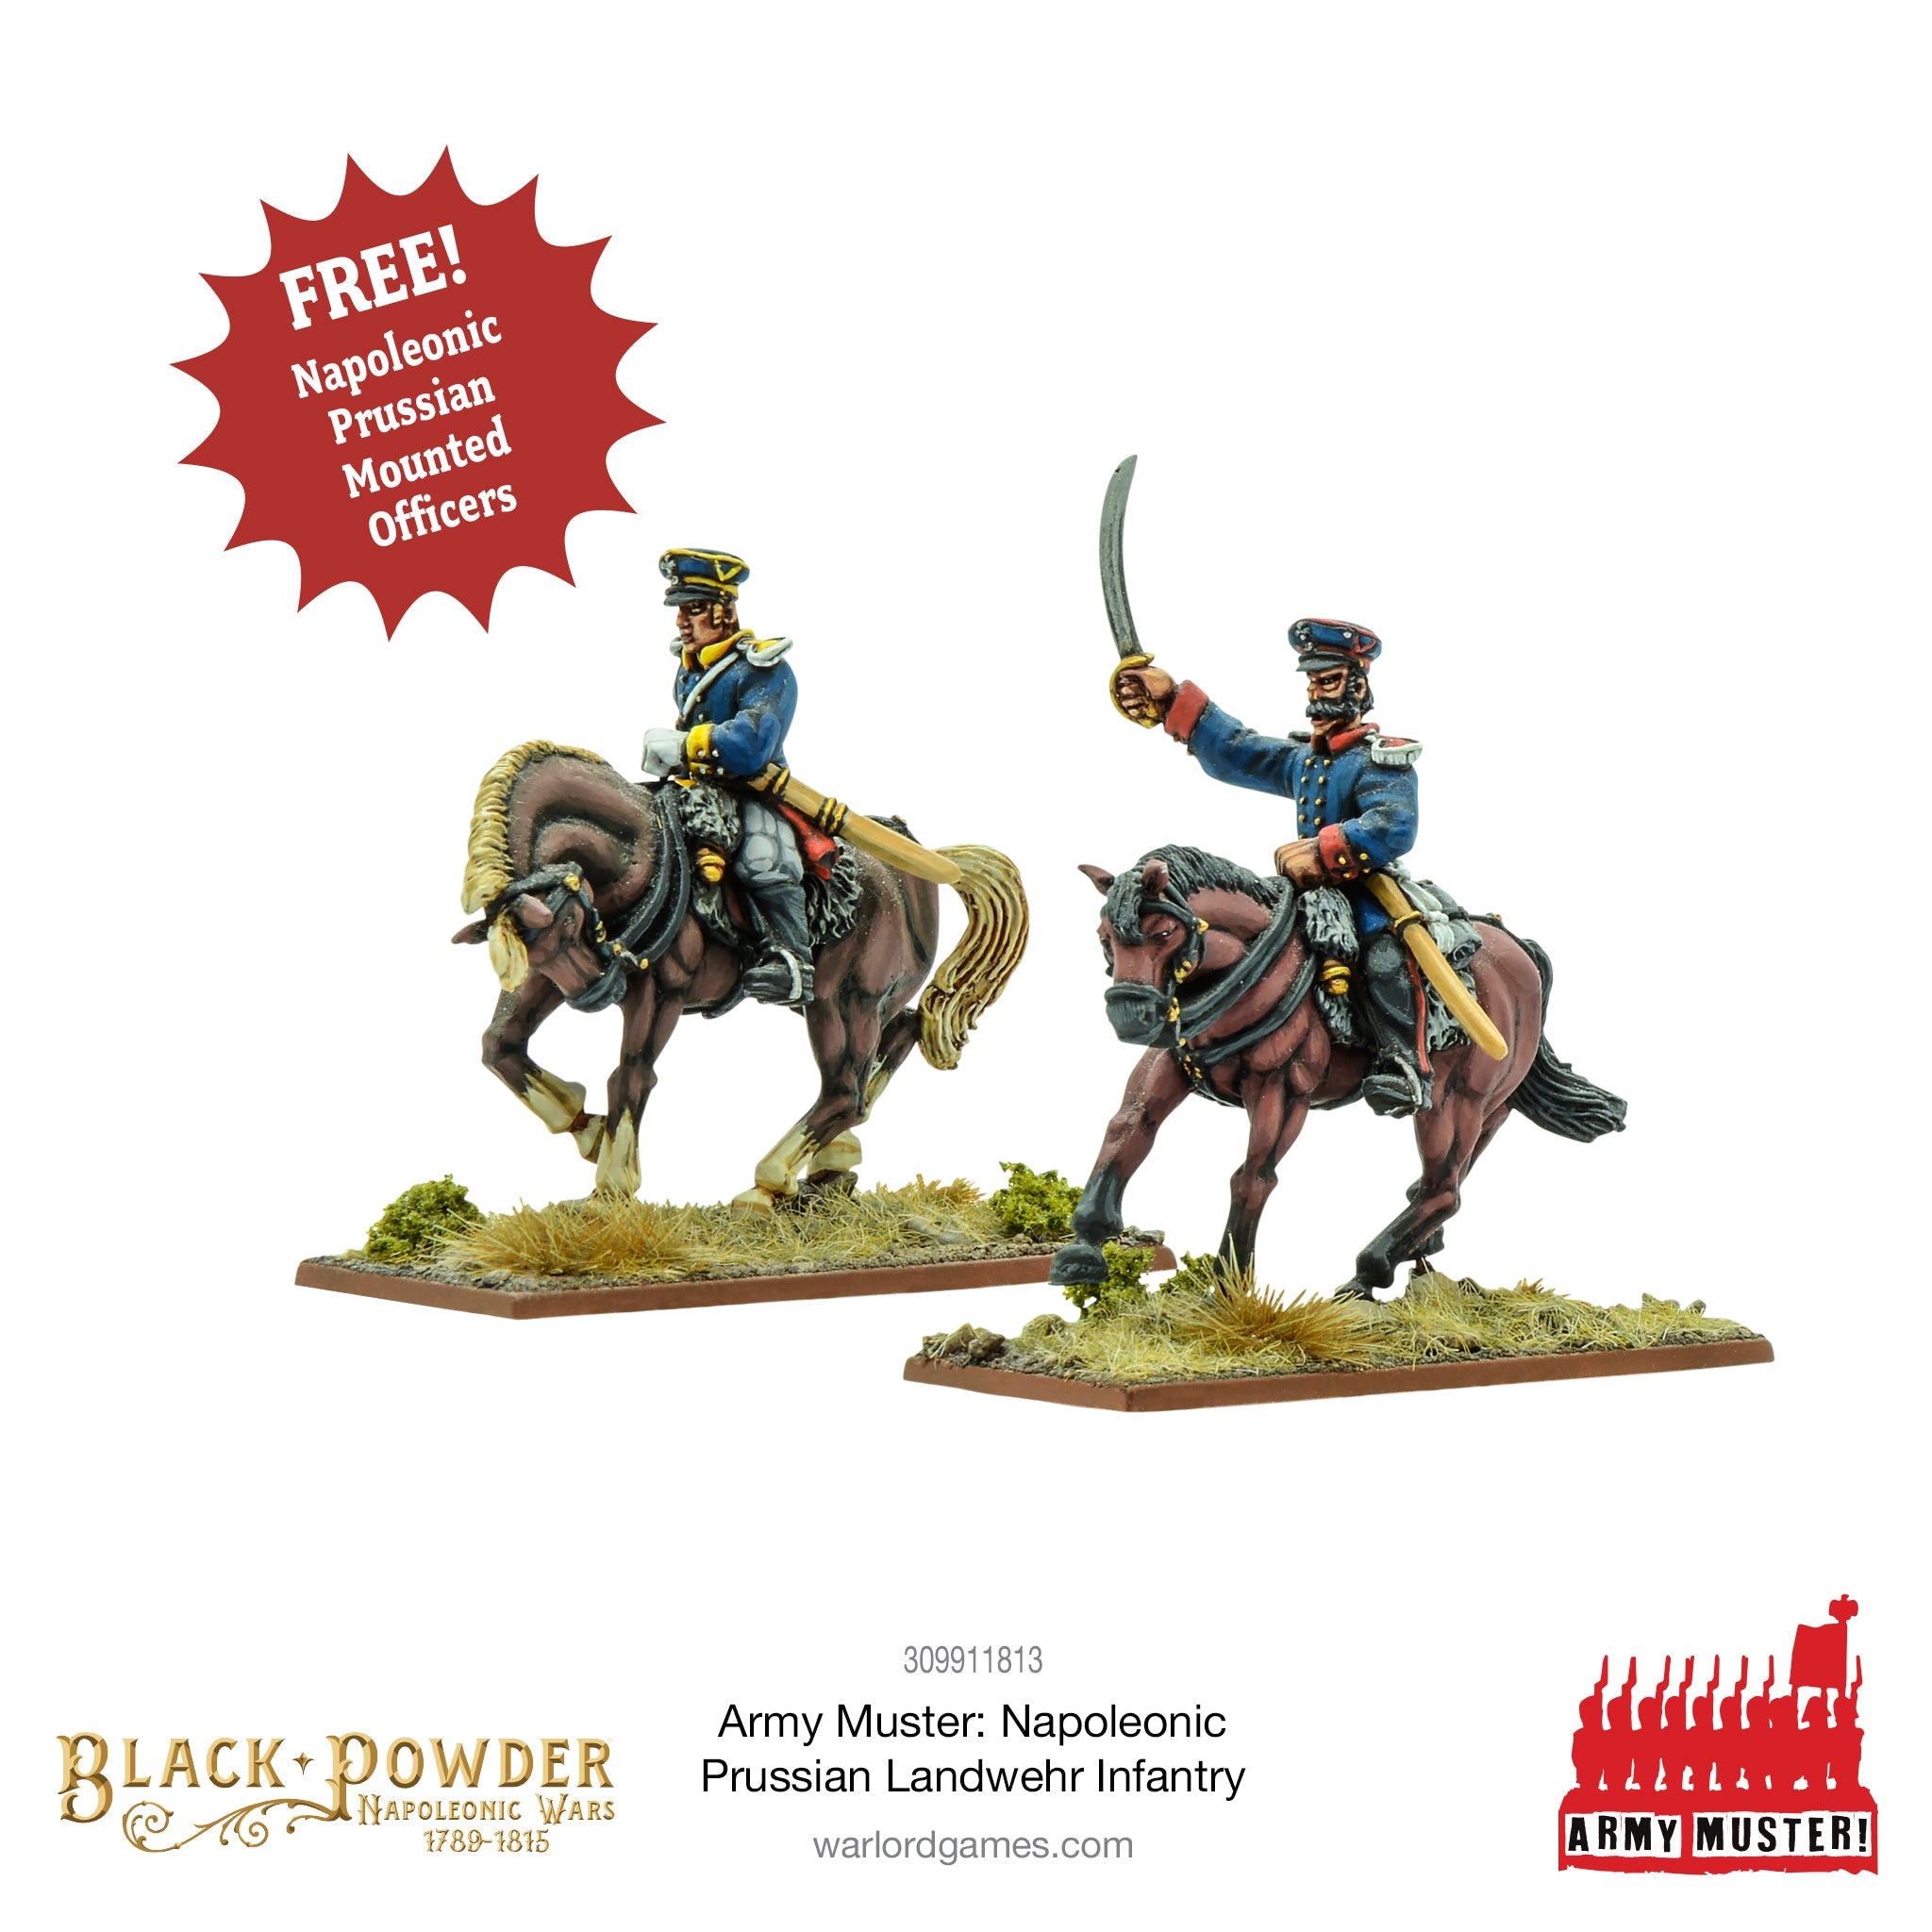 Army Muster: Napoleonic Prussian Landwehr Infantry